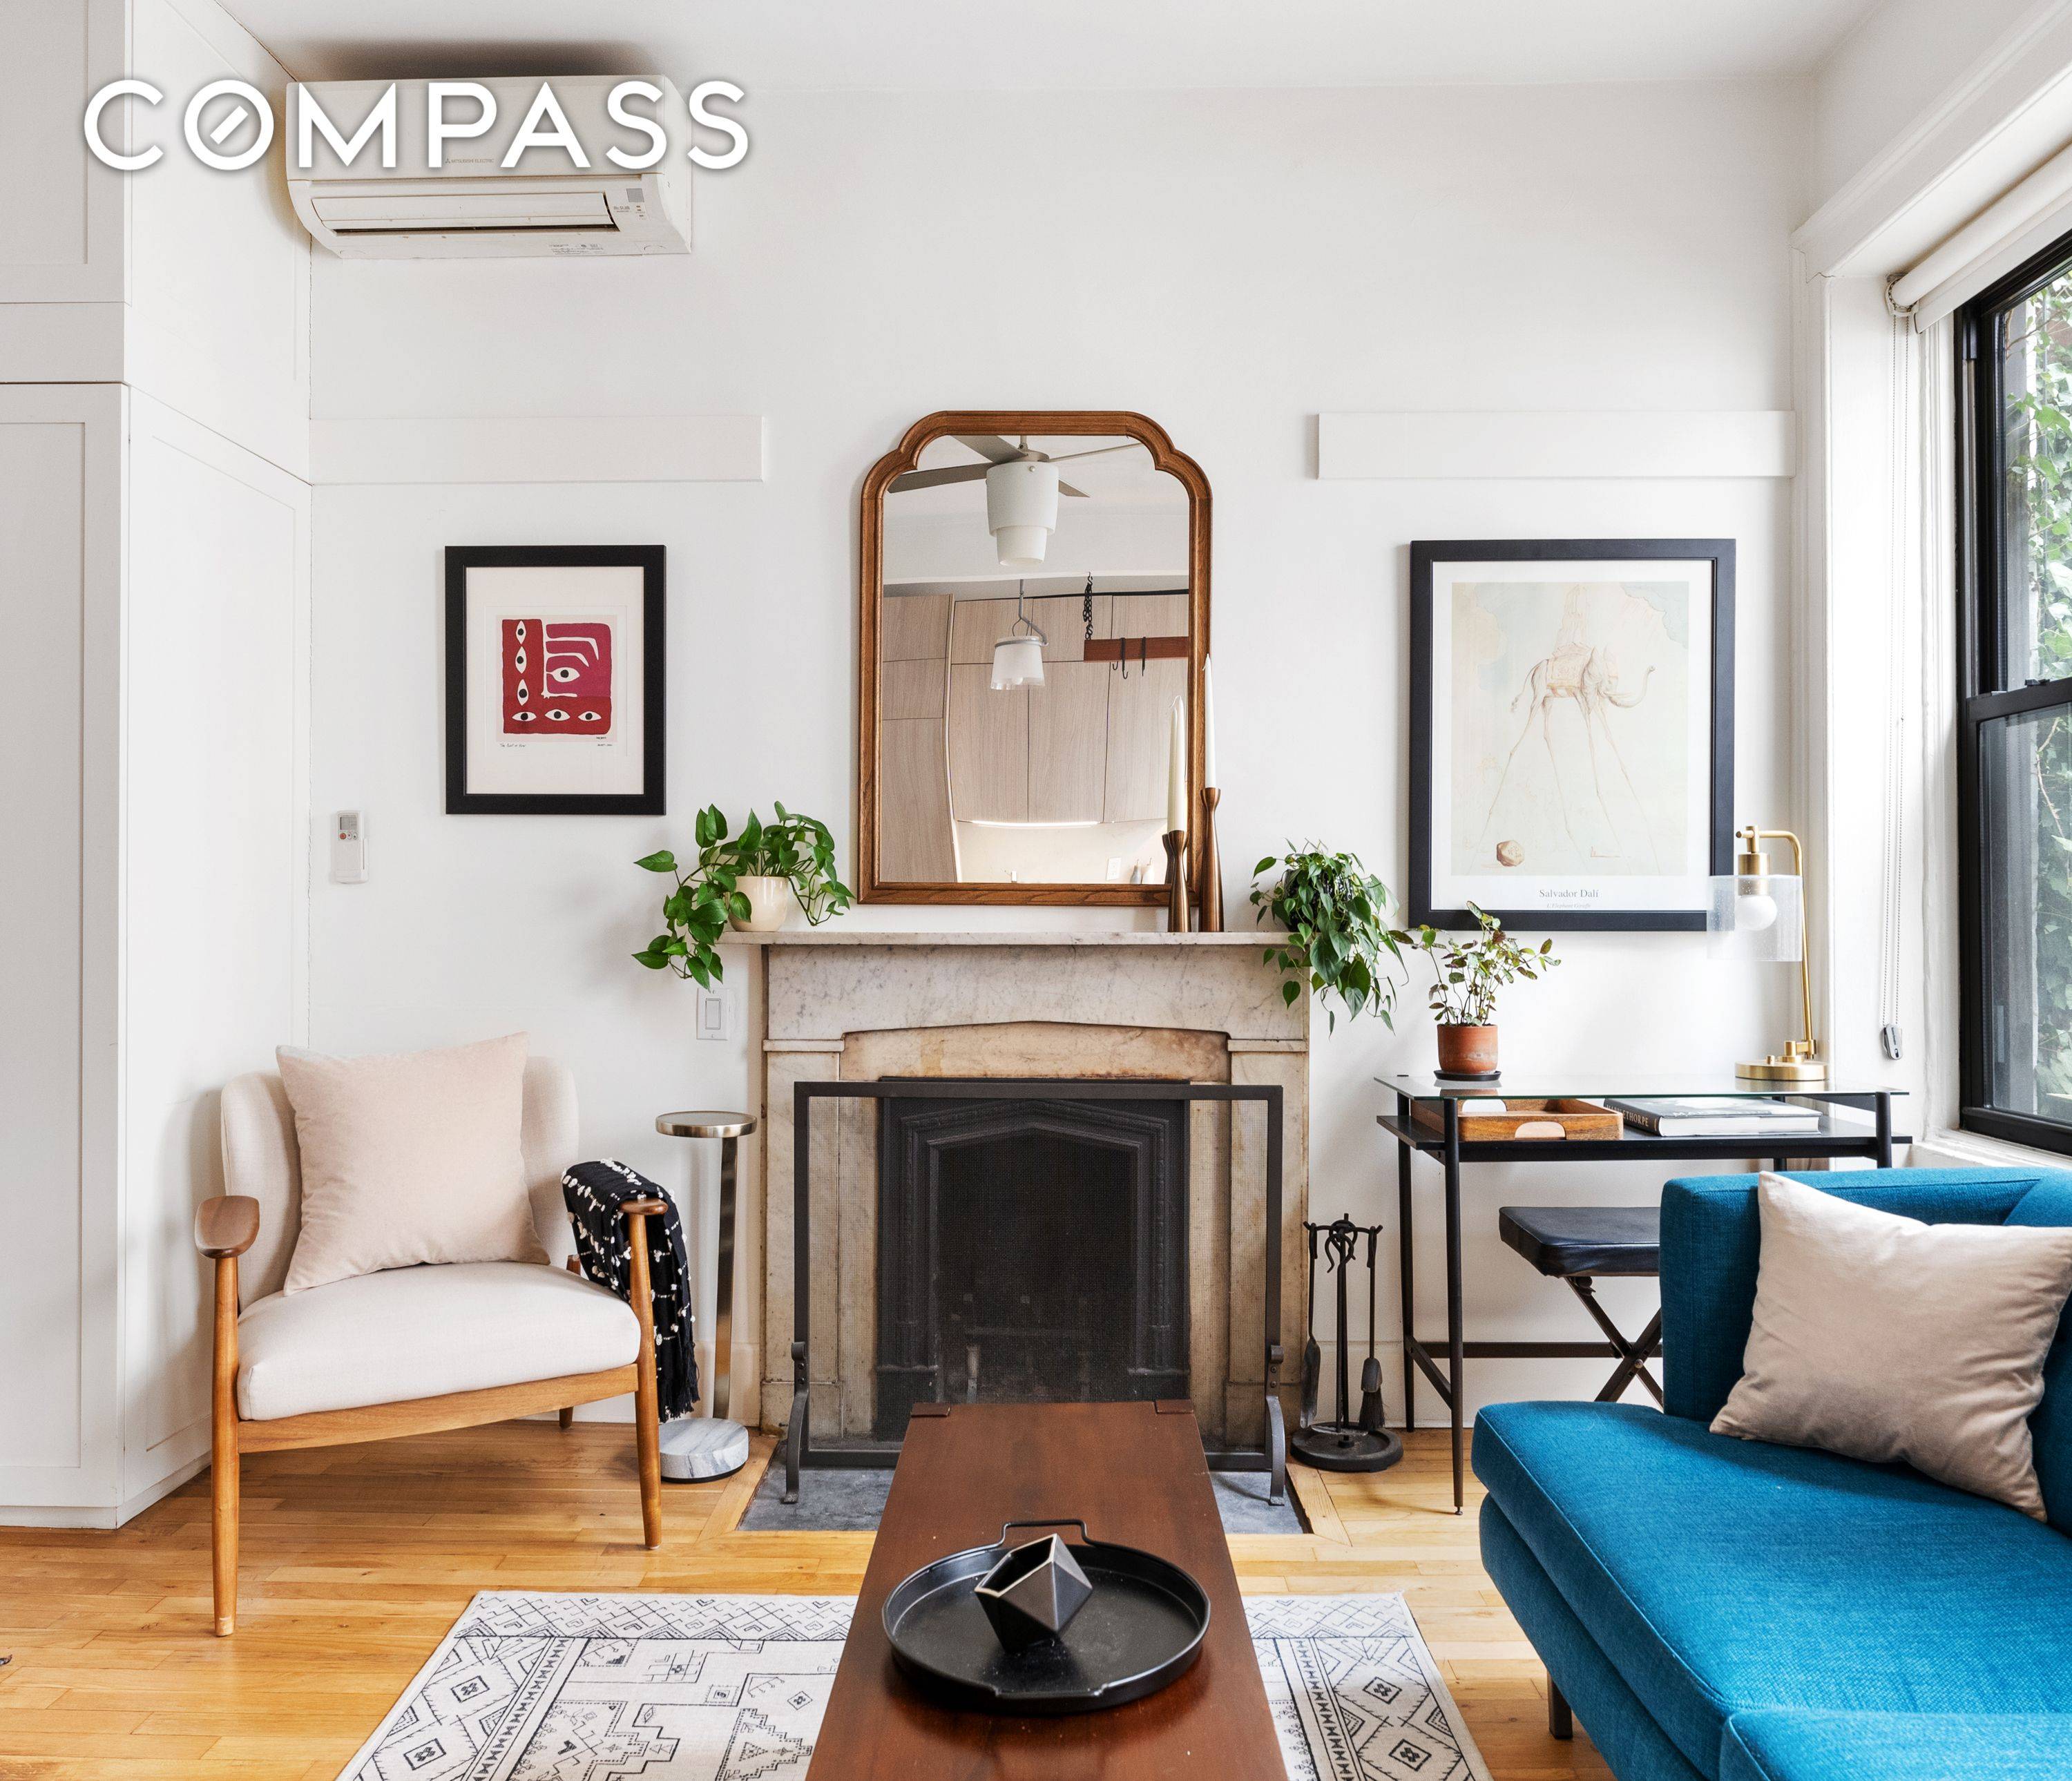 Clean, modern lines are gracefully unified with prewar details in this spacious, turnkey, full floor 2 bedroom Chelsea home with a wood burning fireplace !